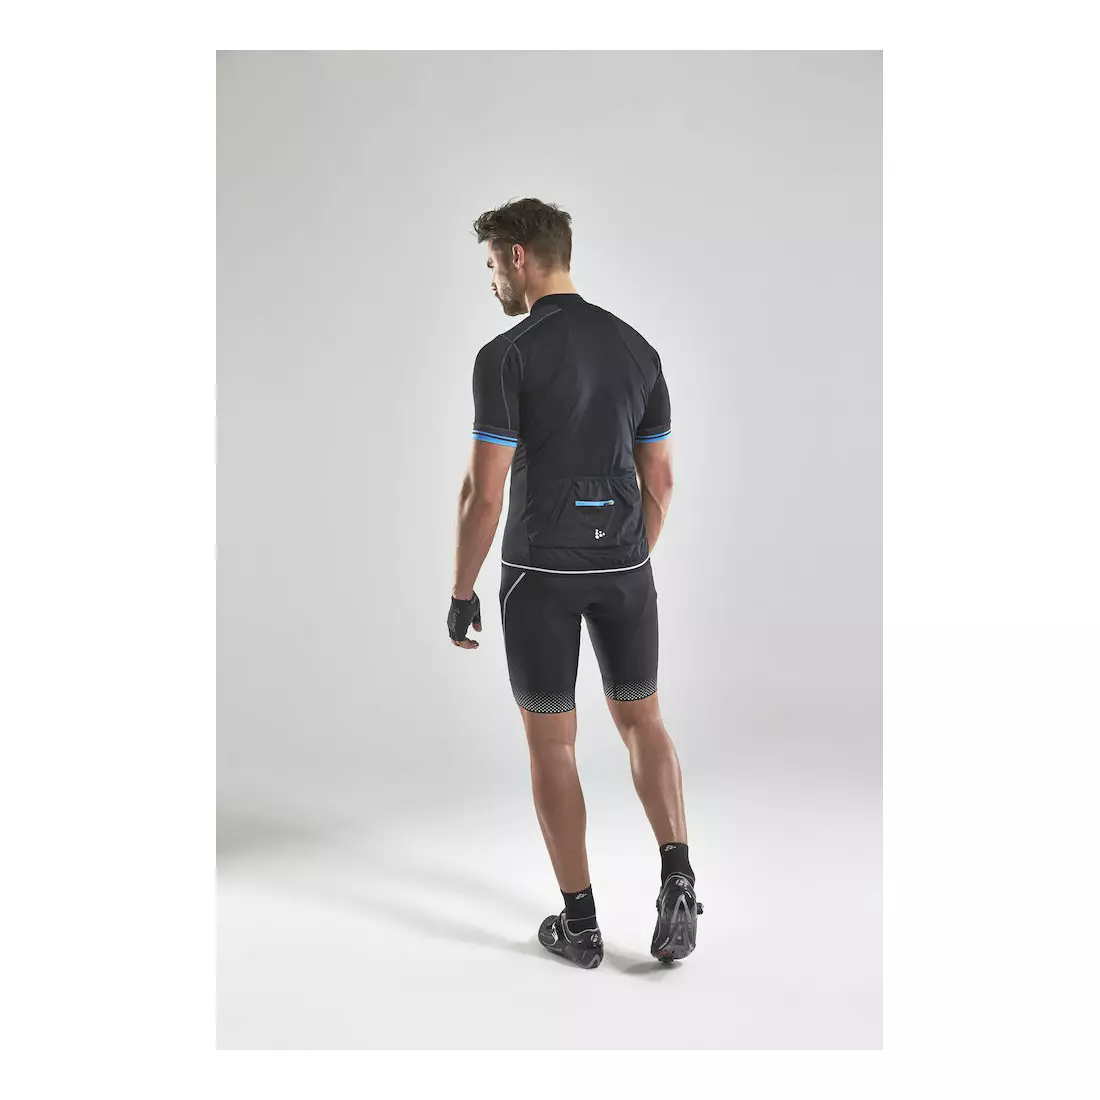 CRAFT PUNCHEUR men's cycling jersey 1903294-2381